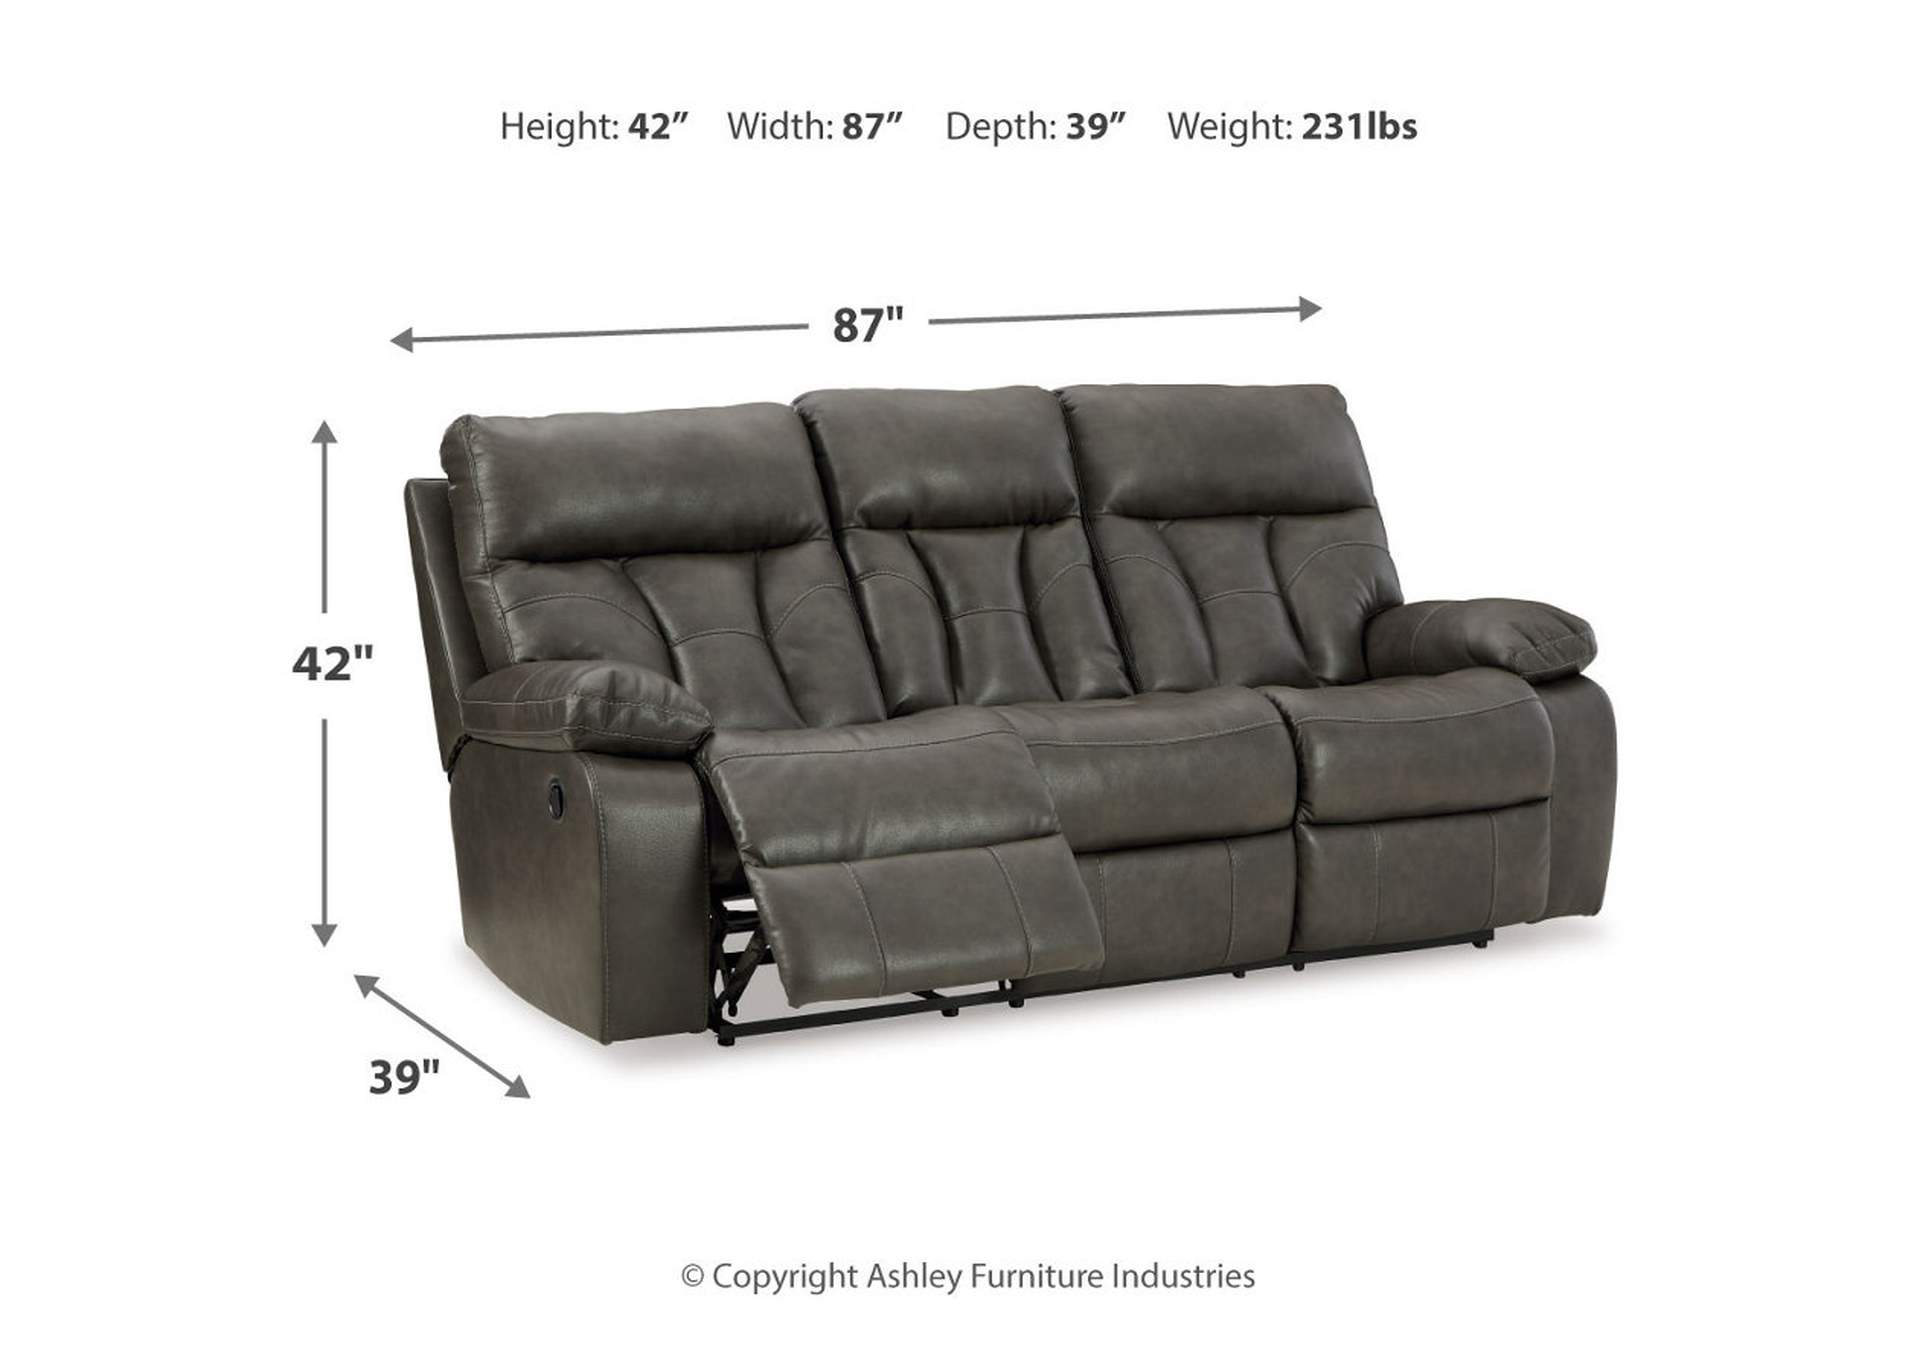 Willamen Reclining Sofa with Drop Down Table,Signature Design By Ashley